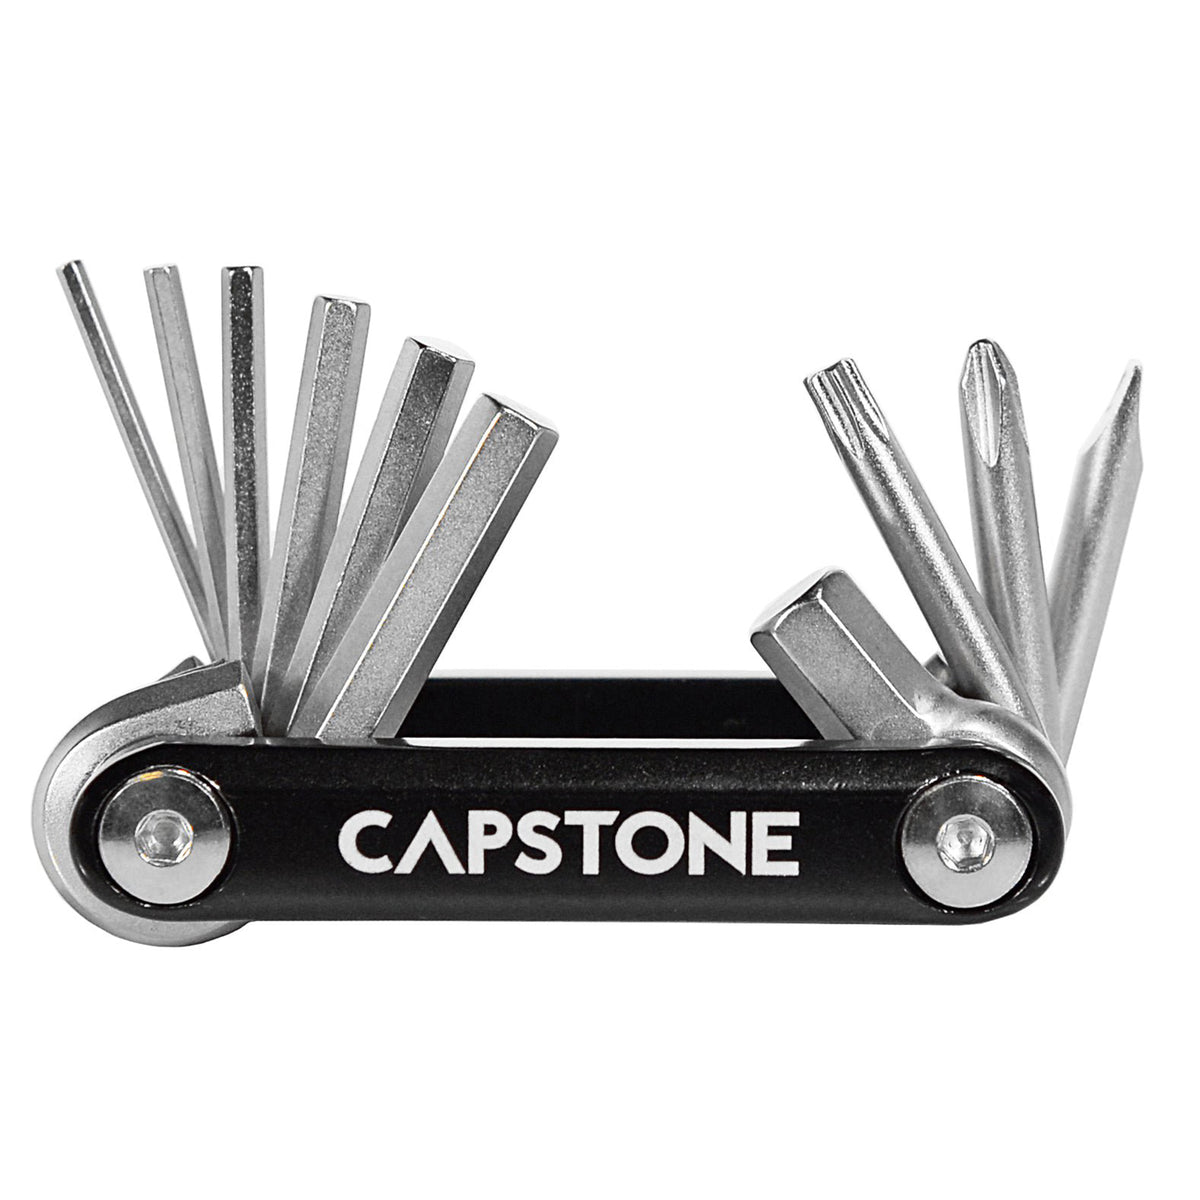 Capstone 10 in 1 Folding Tool | Up to 8mm Allen